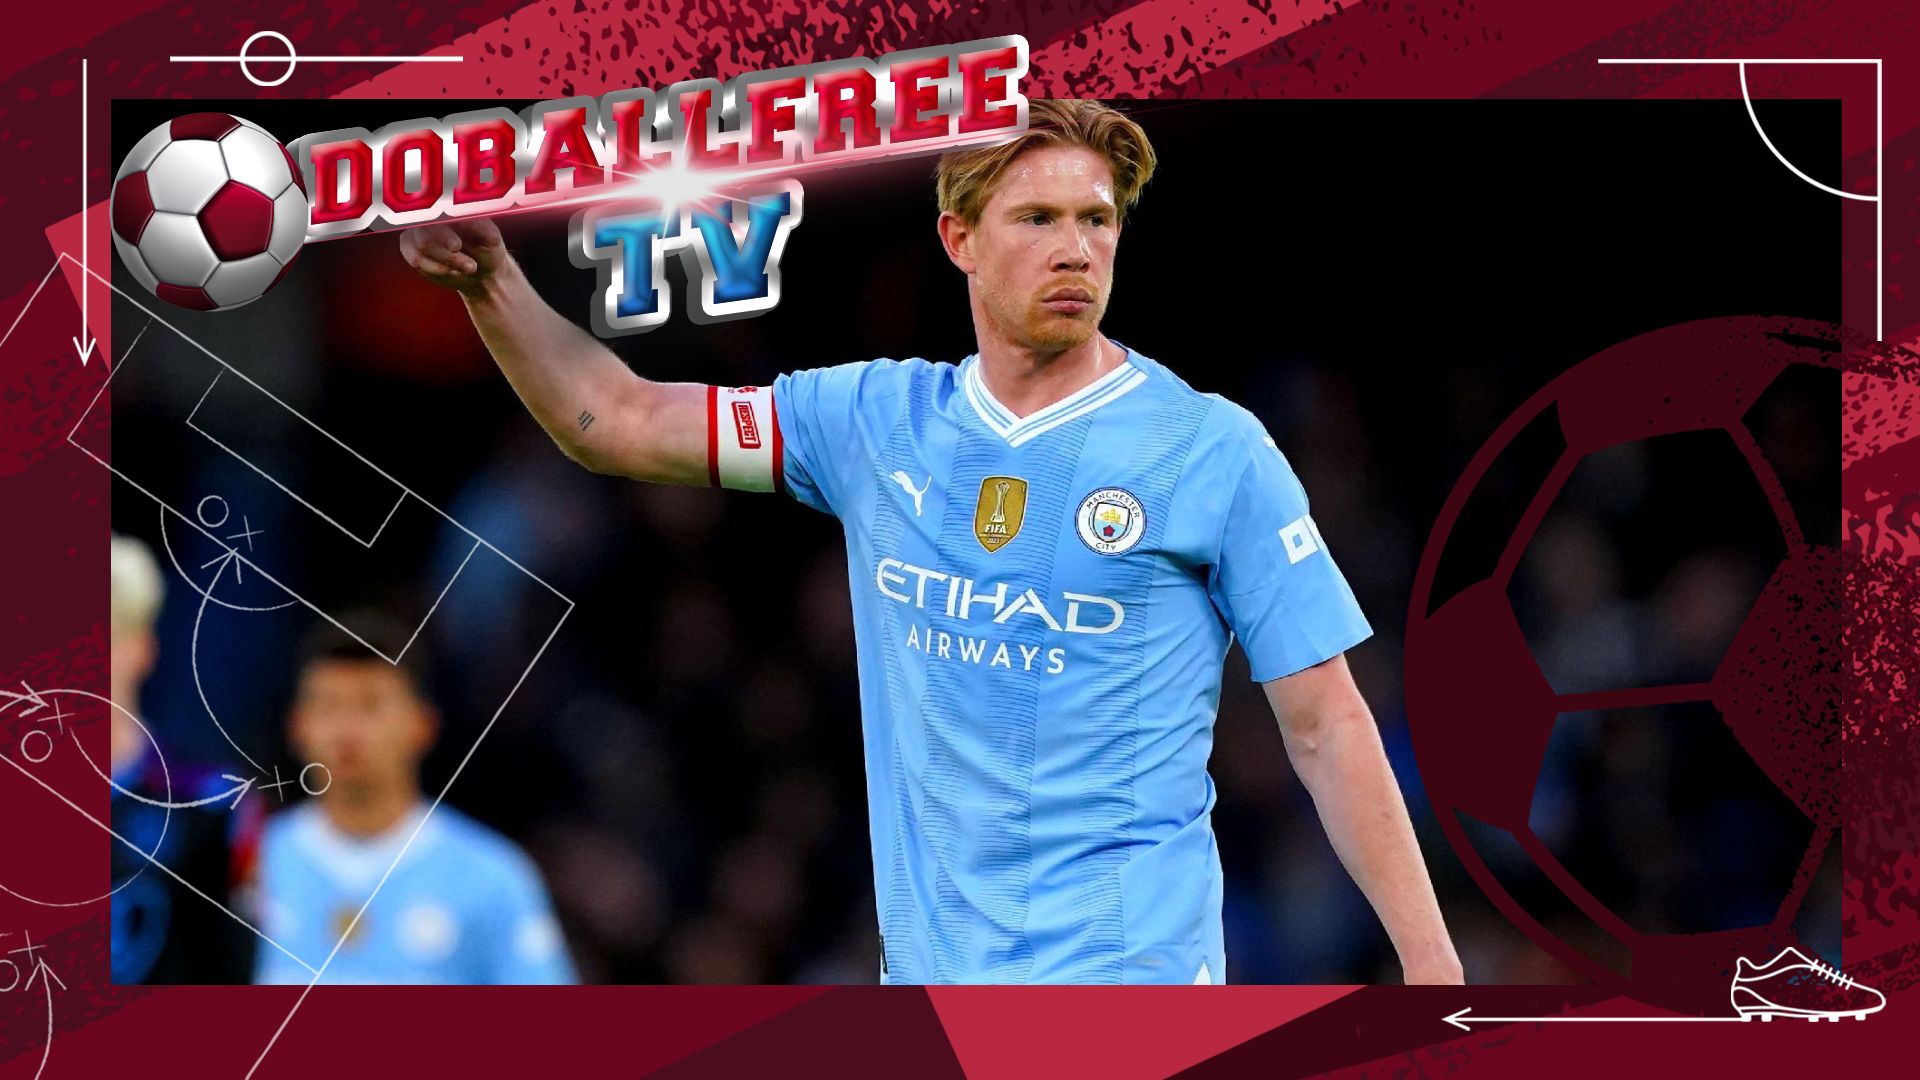 Frank Lampard names Kevin De Bruyne as the best midfield player of the Premier League era.